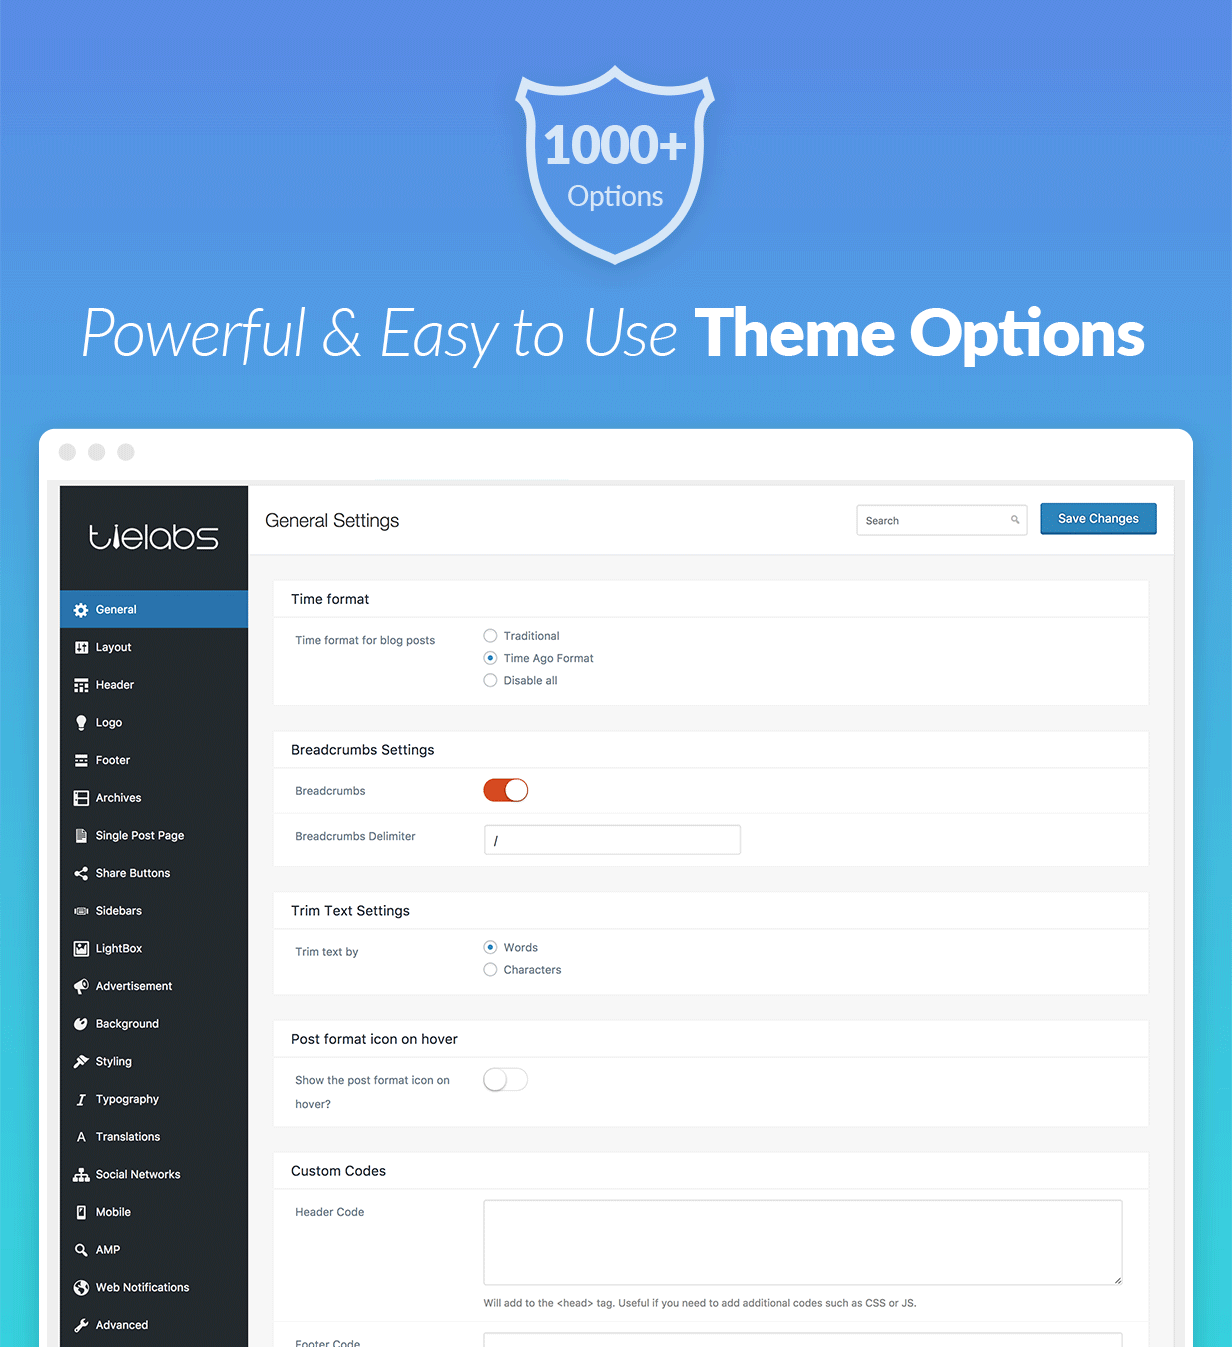 Powerful and Easy to Use Theme Options